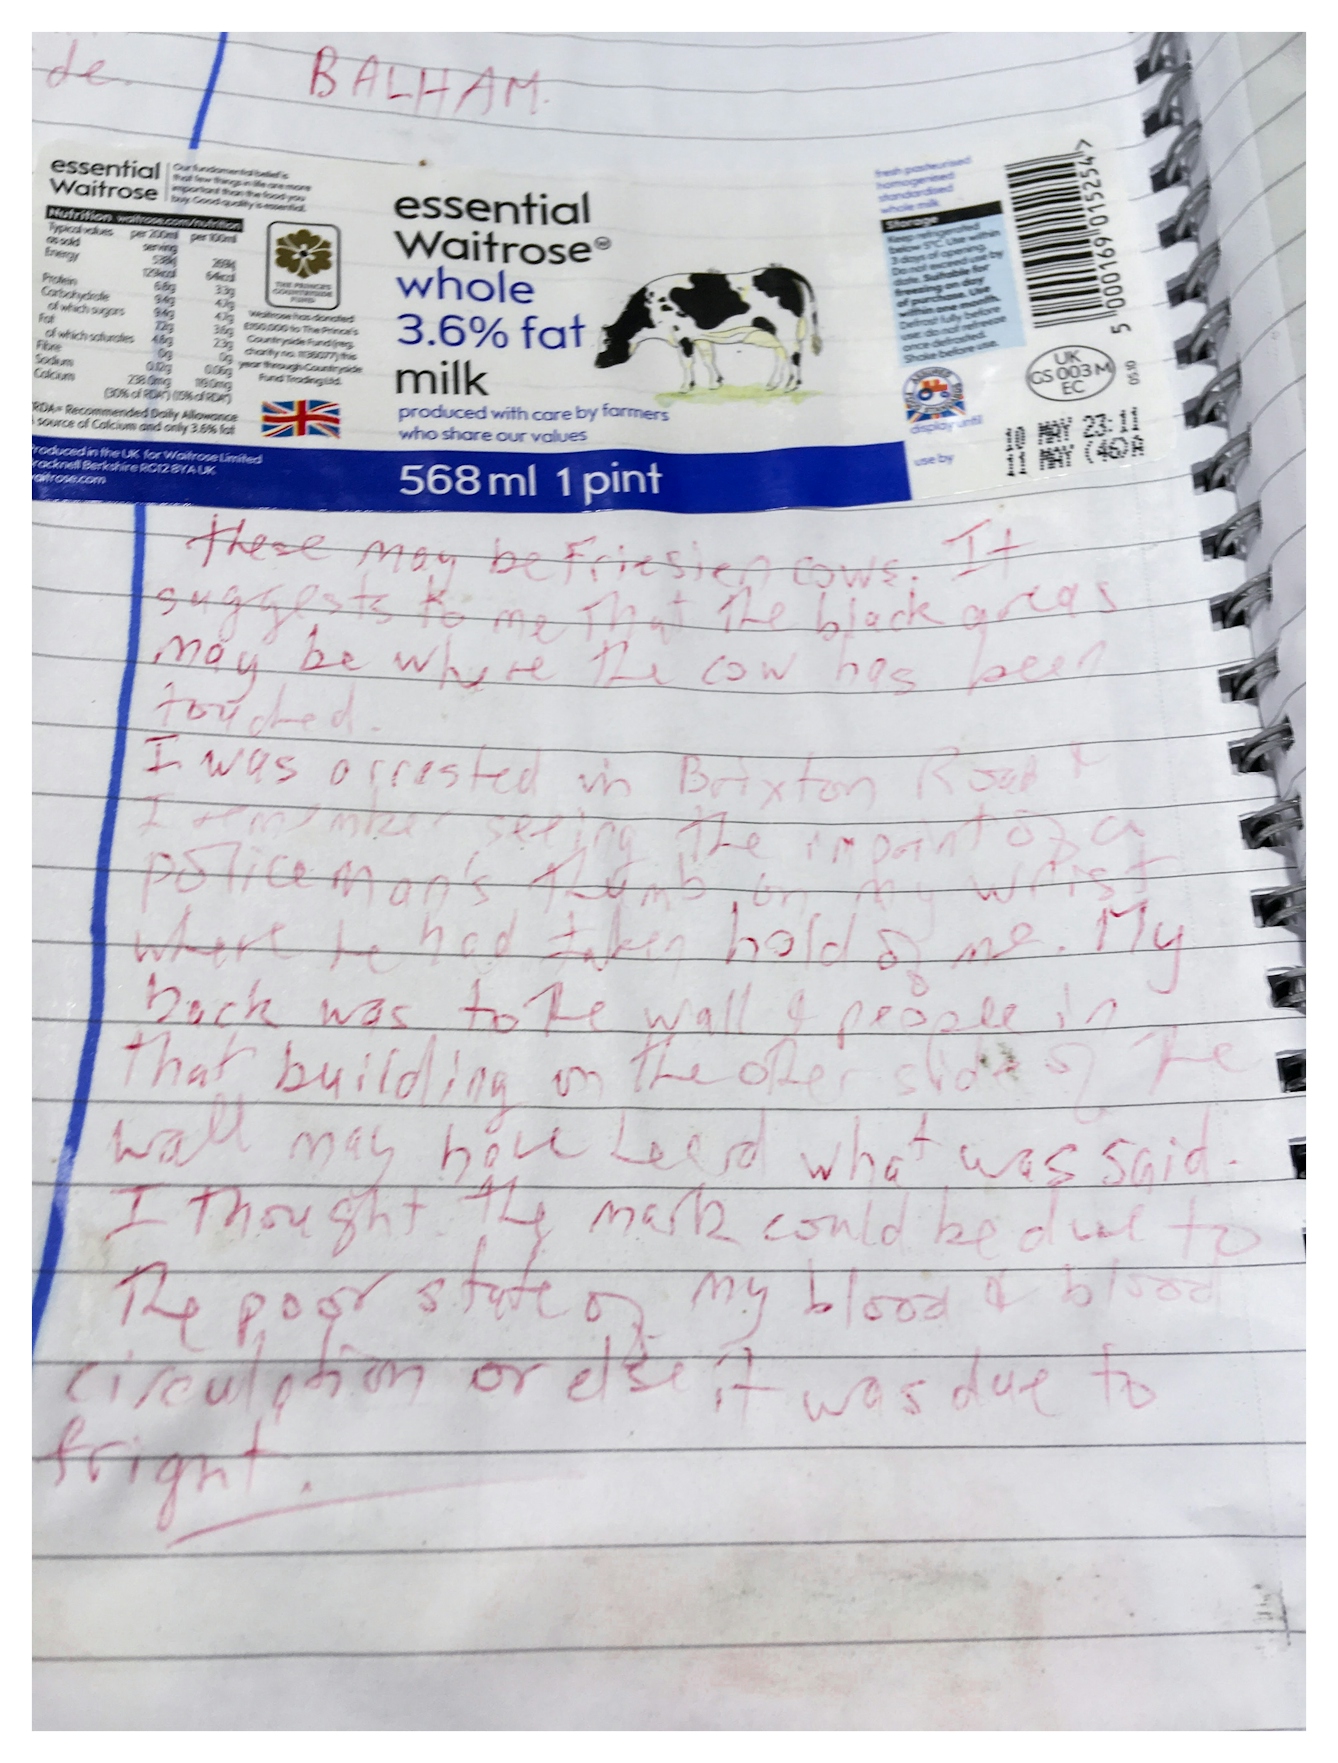 Documentation photograph of a page from a lined scrapbook. At the top is a stuck-in label from a milk bottle including a drawing of a Friesian cow. Below the label is a long handwritten passage which discusses how the black areas of the cow remind the writer of a violent personal experience.